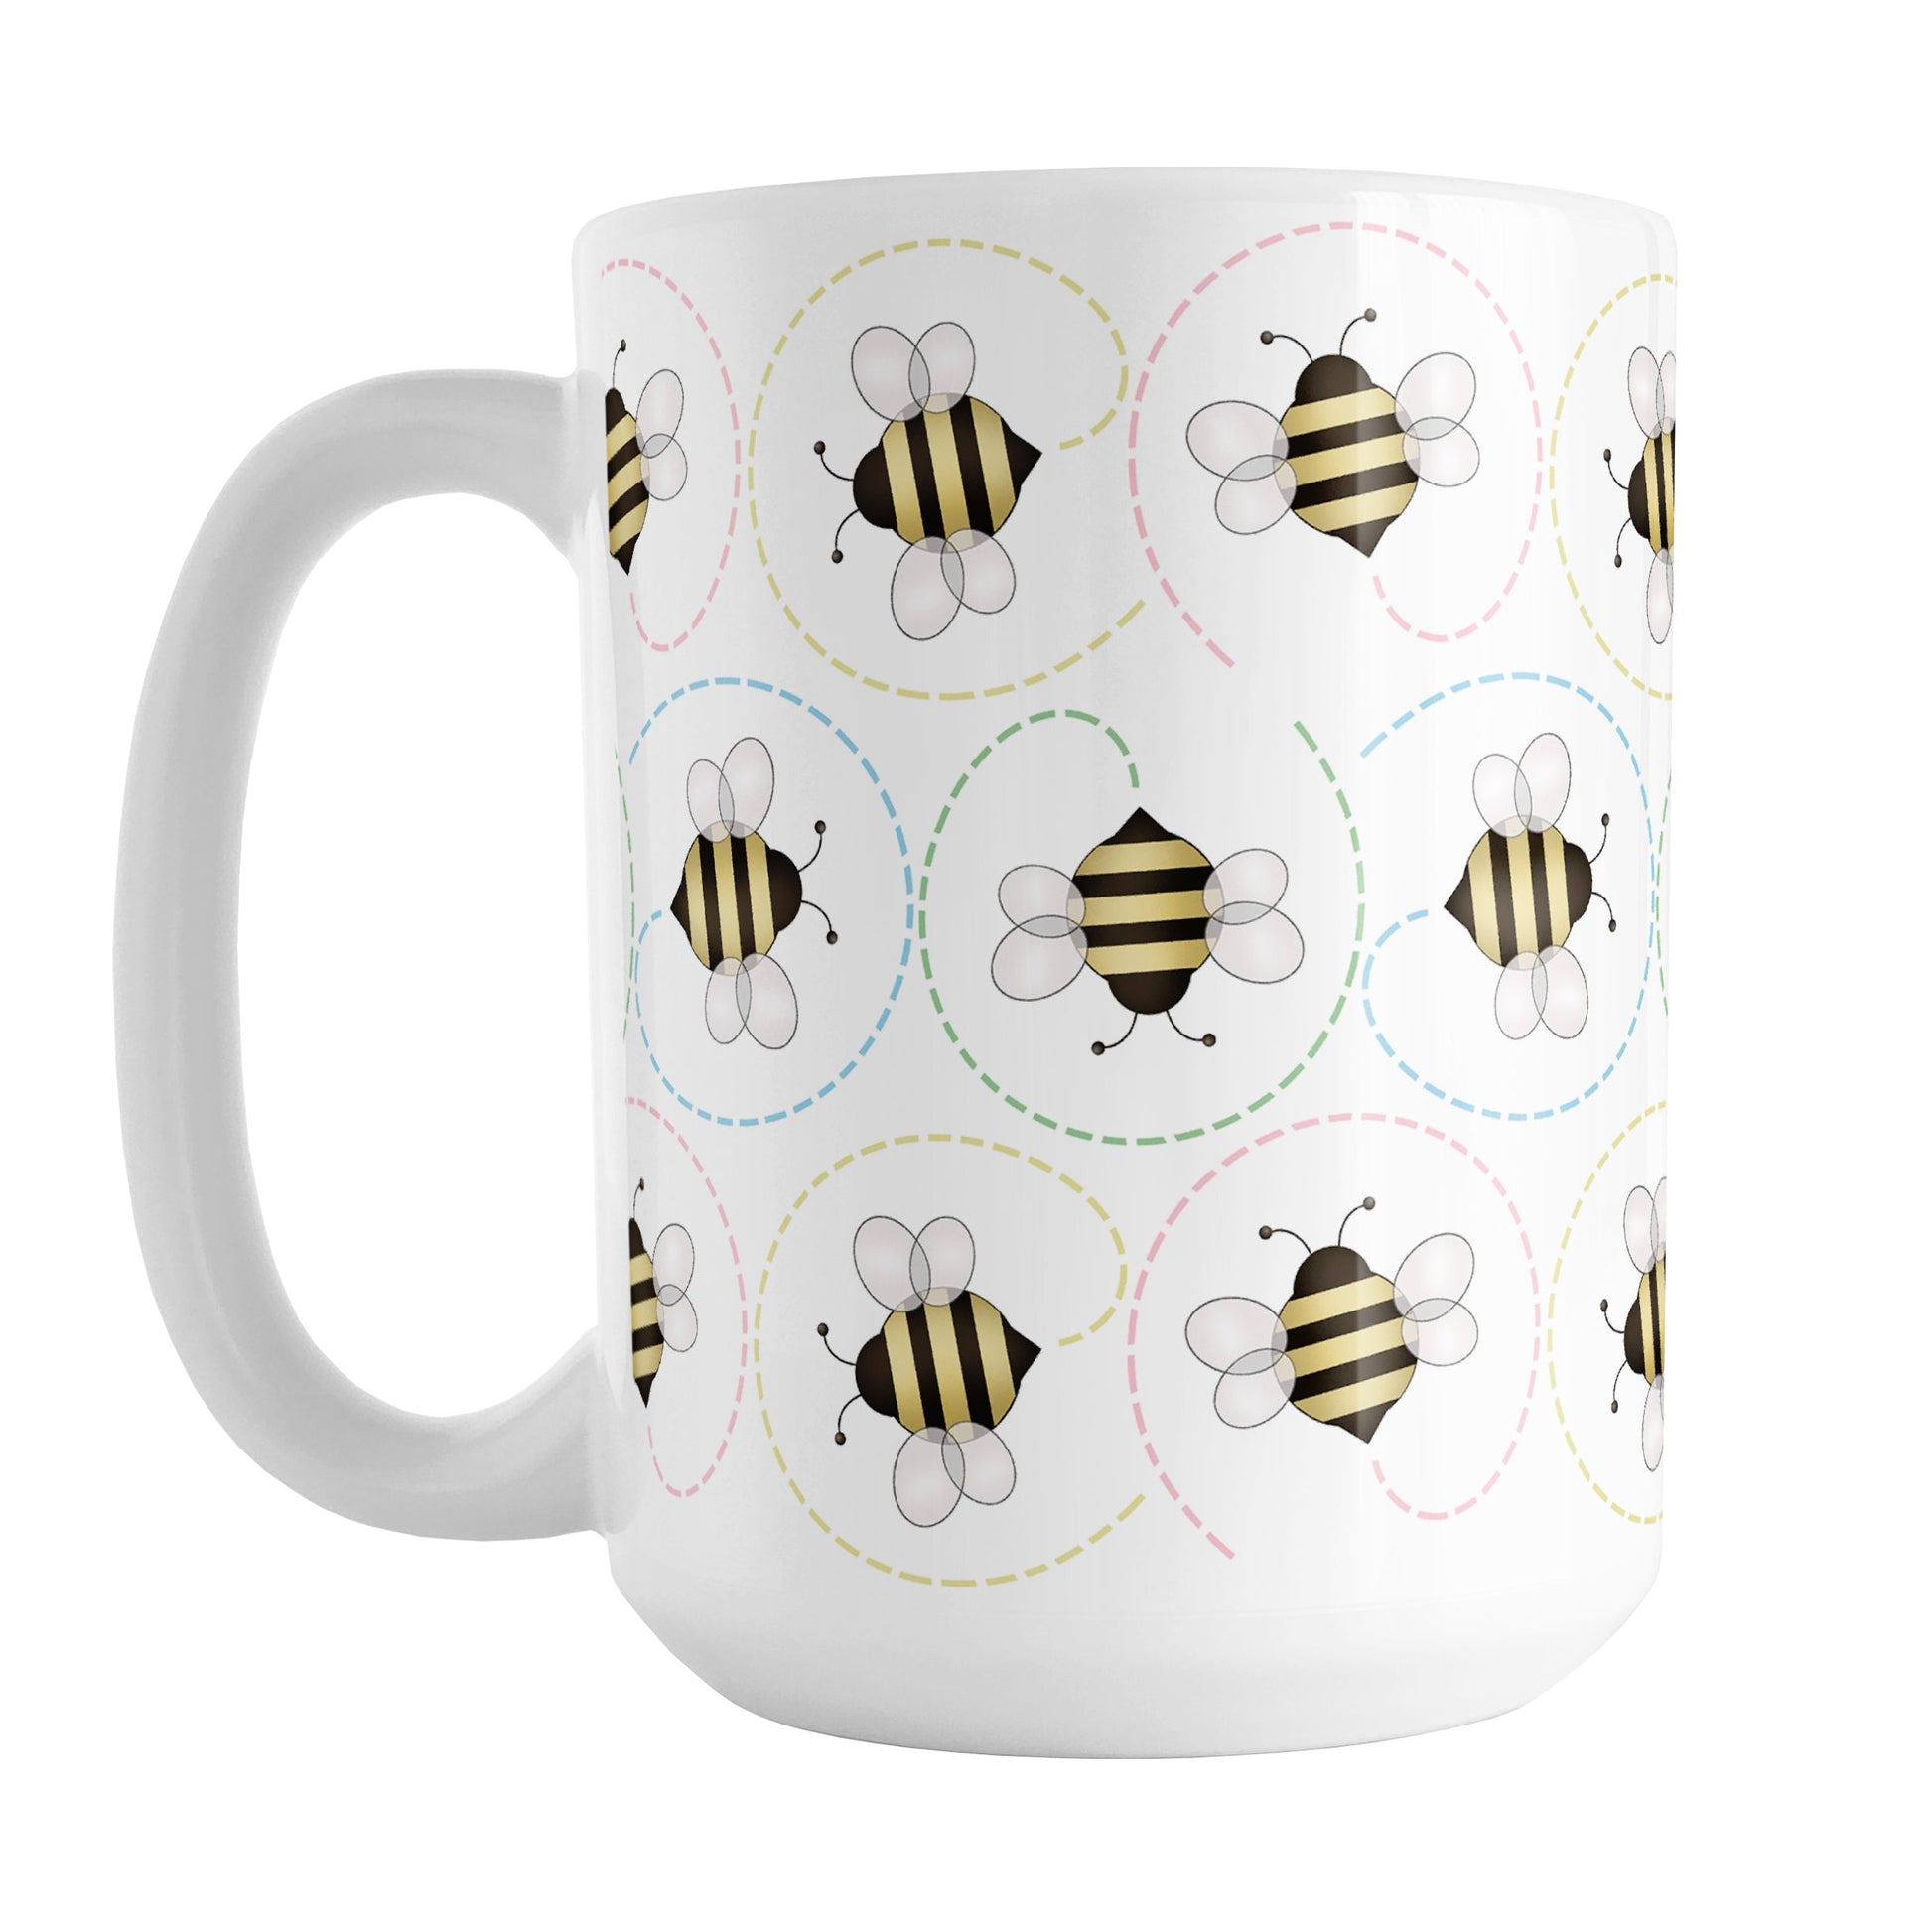 Circling Dainty Bee Pattern Mug (15oz) at Amy's Coffee Mugs. A ceramic bee mug with adorable dainty black and yellow bees in a pattern around the mug with colorful dotted line circling flight paths. A minimalist bee design for bee lovers who also love color and happy designs.